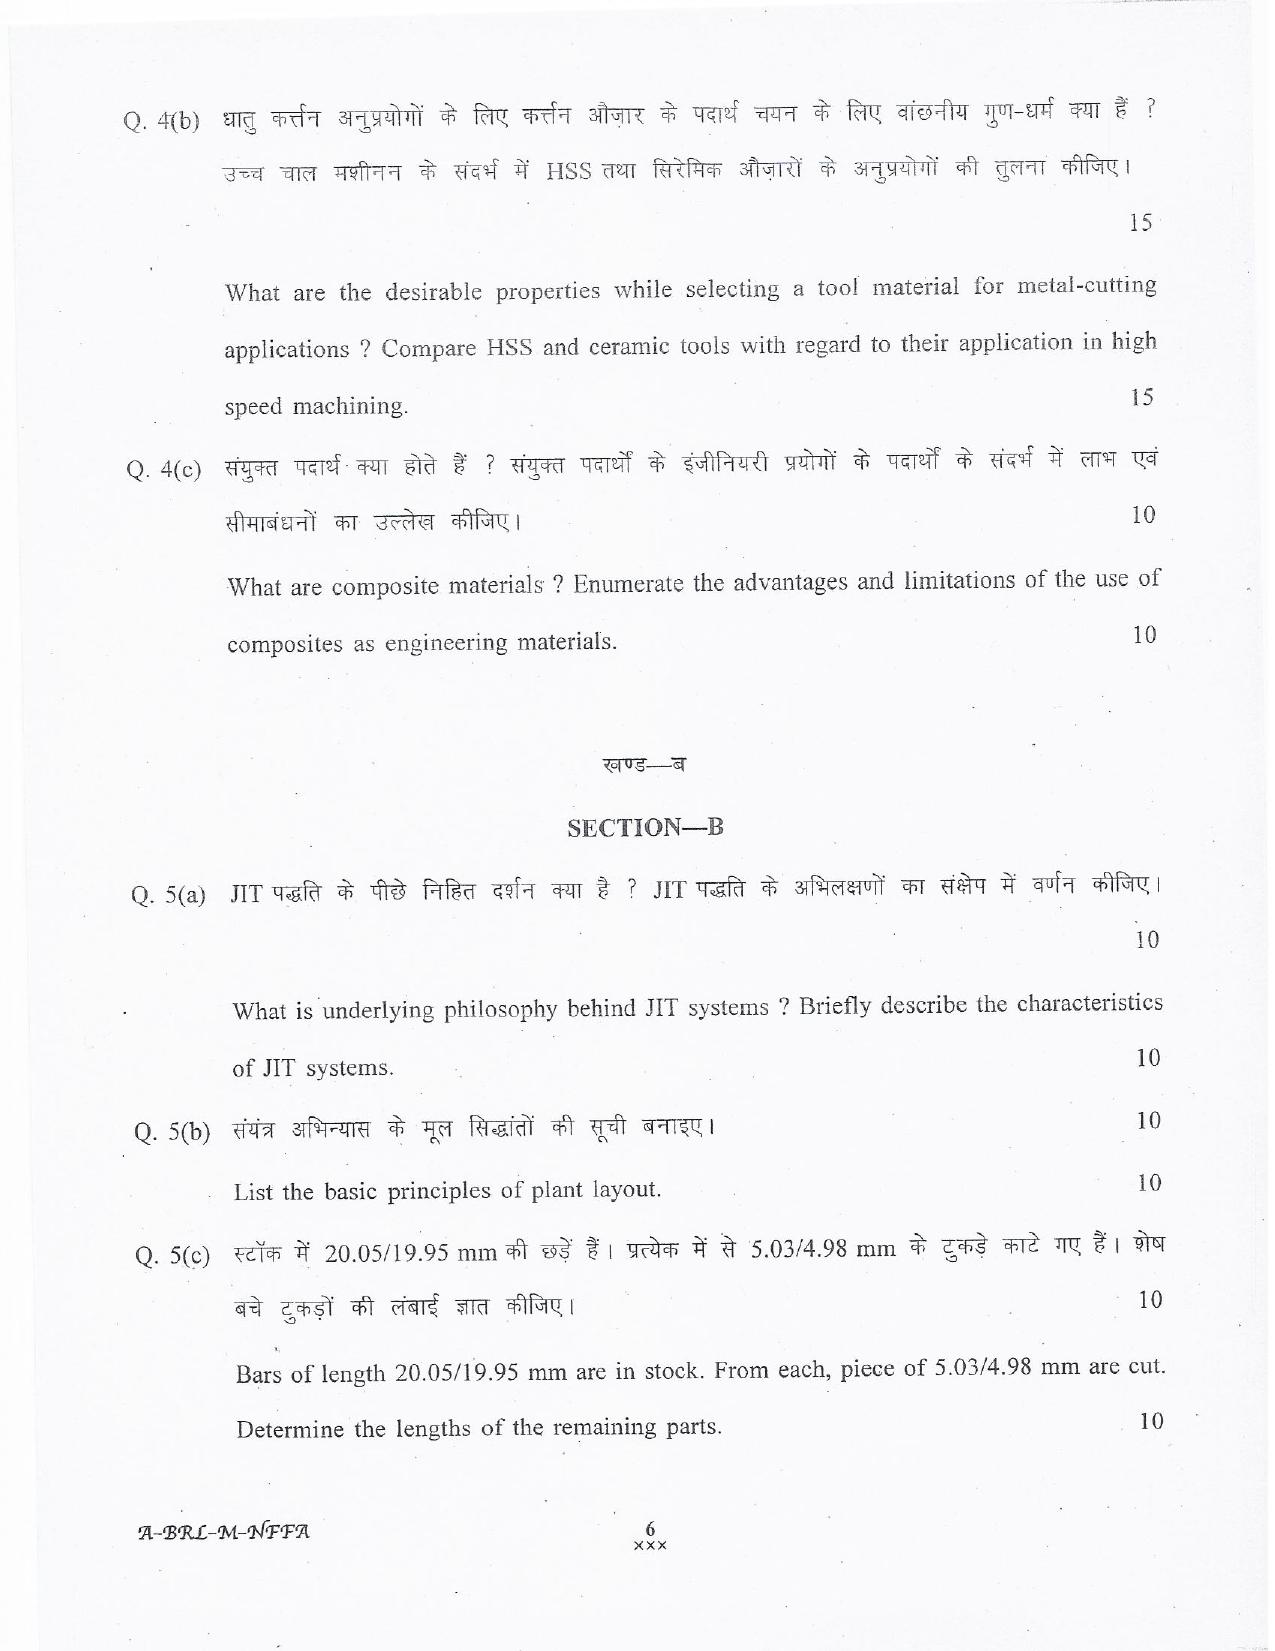 lakshadweep.gov.in Mechanical Engineering Question Papers - Page 6